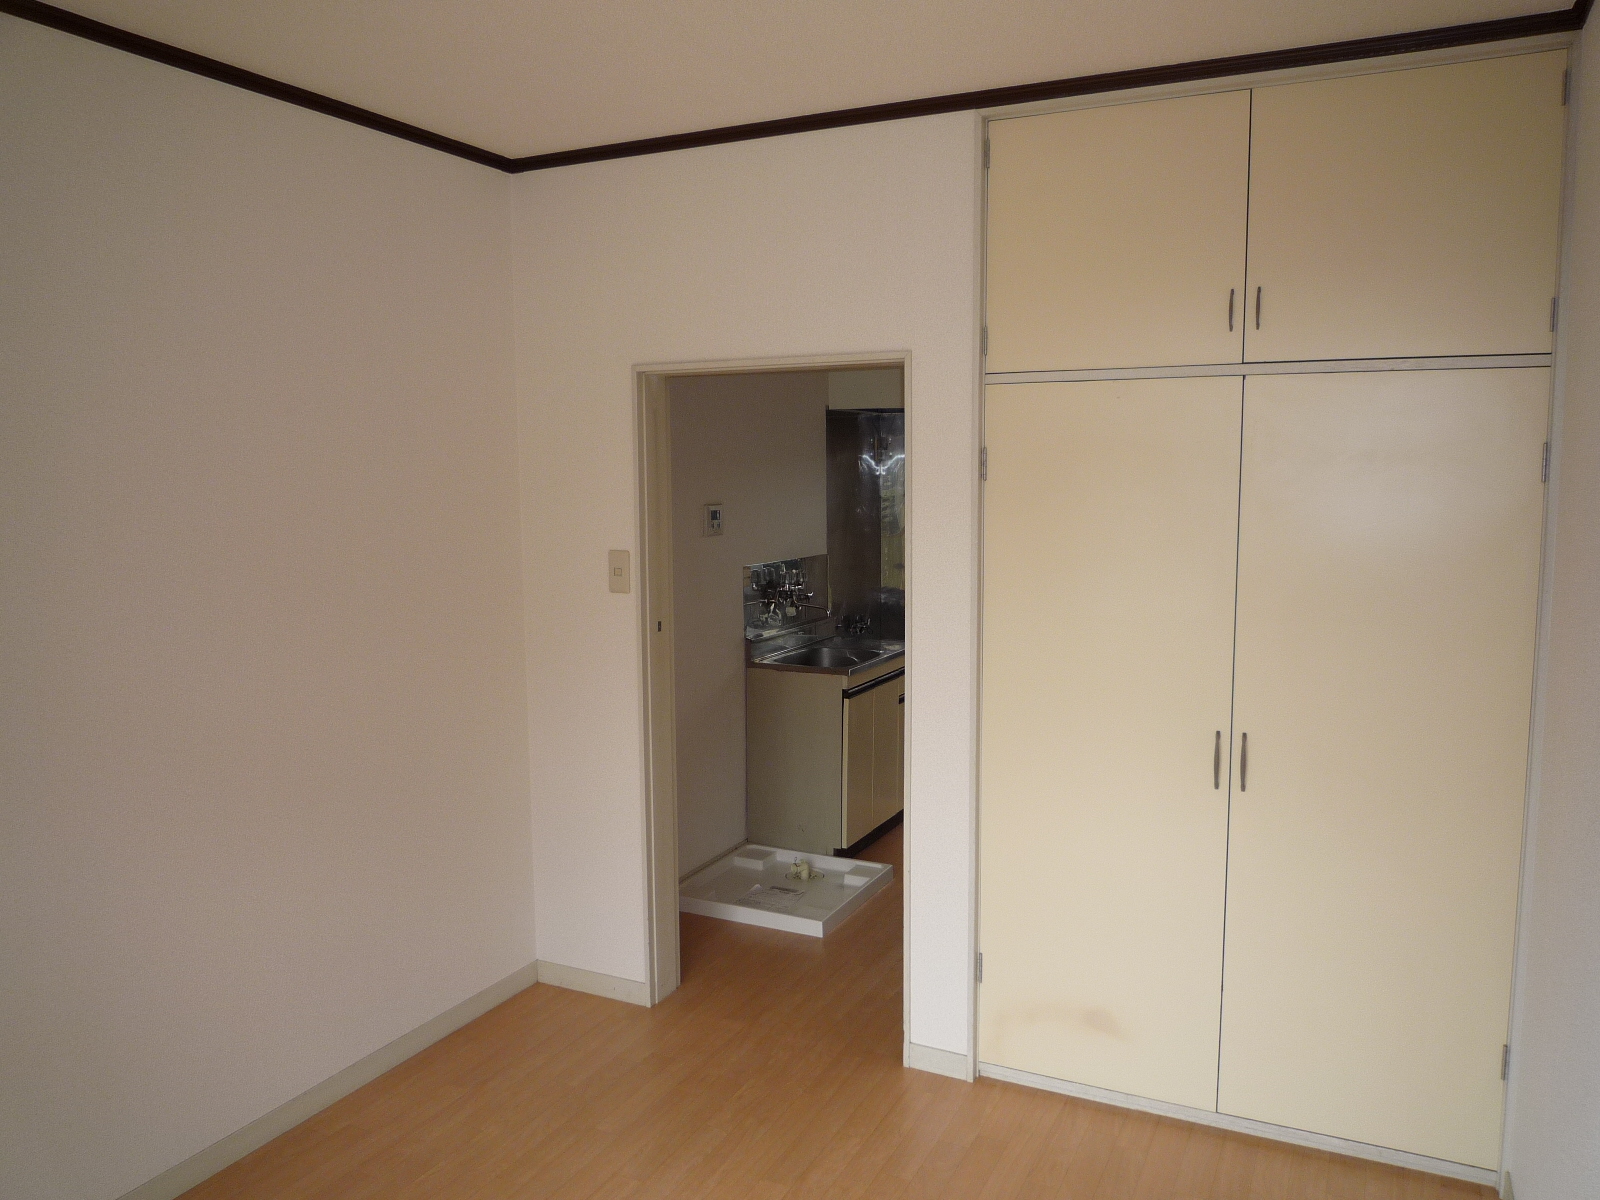 Living and room. Upper closet with storage space! 